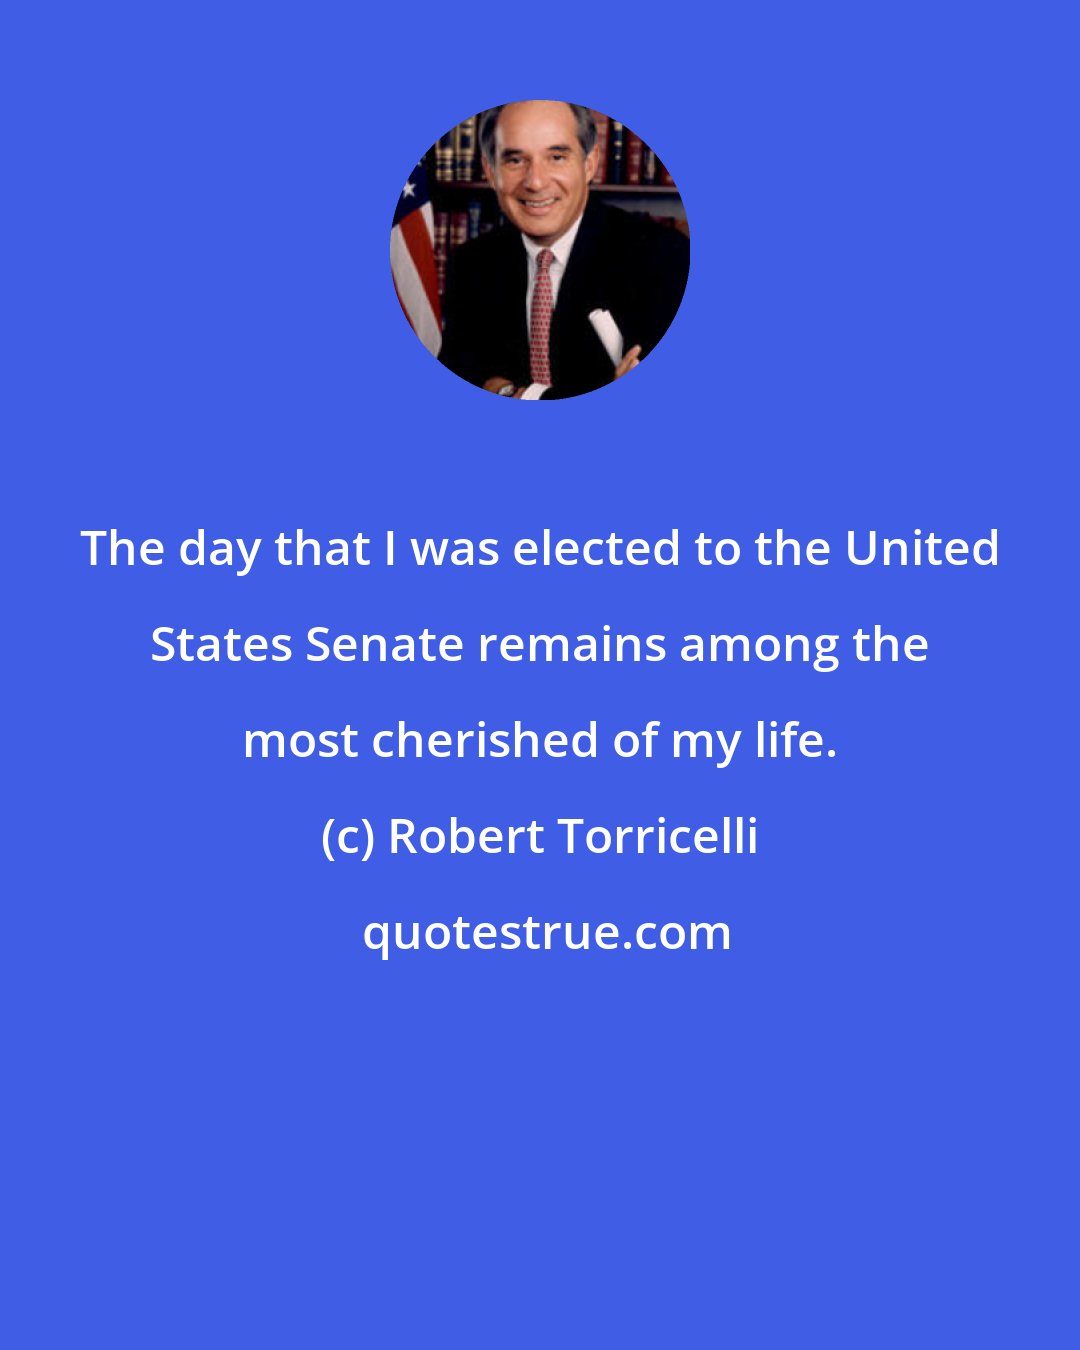 Robert Torricelli: The day that I was elected to the United States Senate remains among the most cherished of my life.